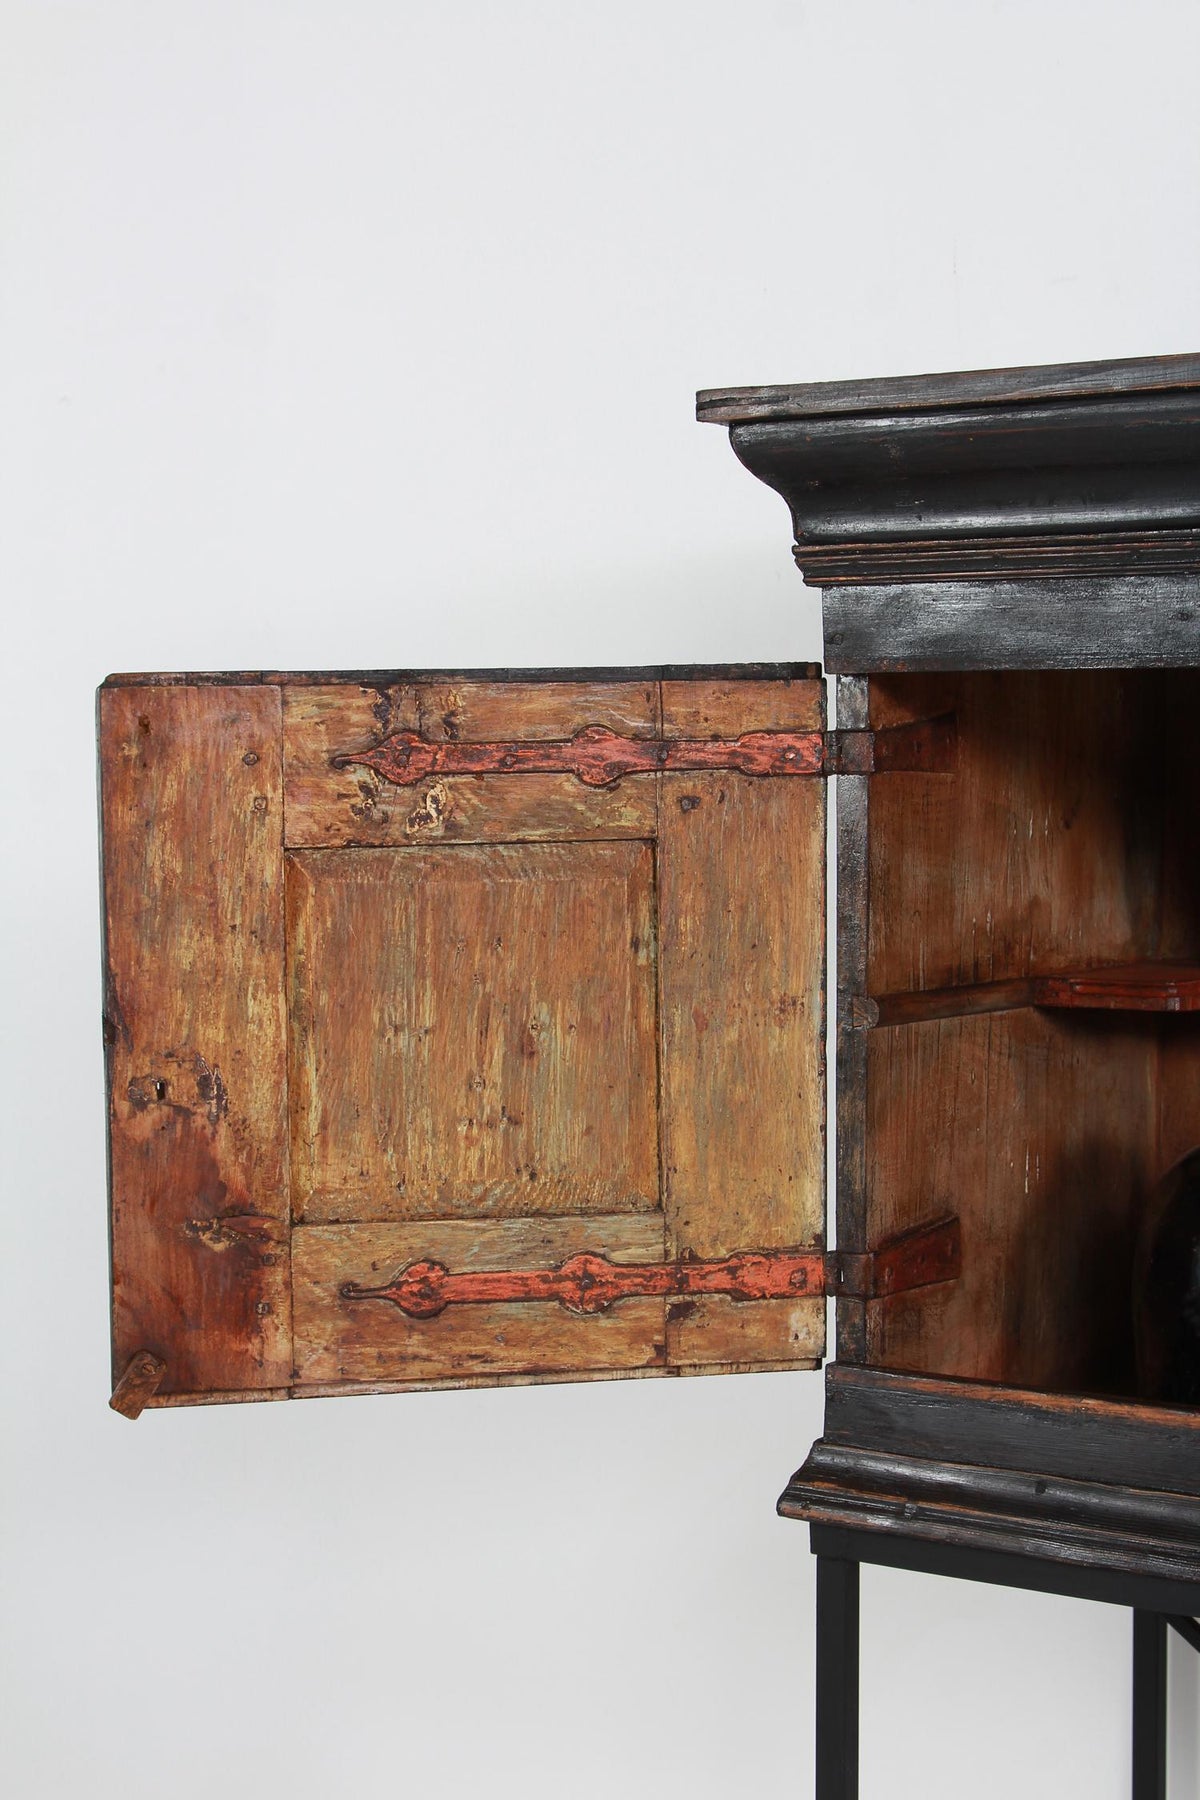 UNIQUE SWEDISH BAROQUE 18THC CABINET ON ARTISAN METAL STAND